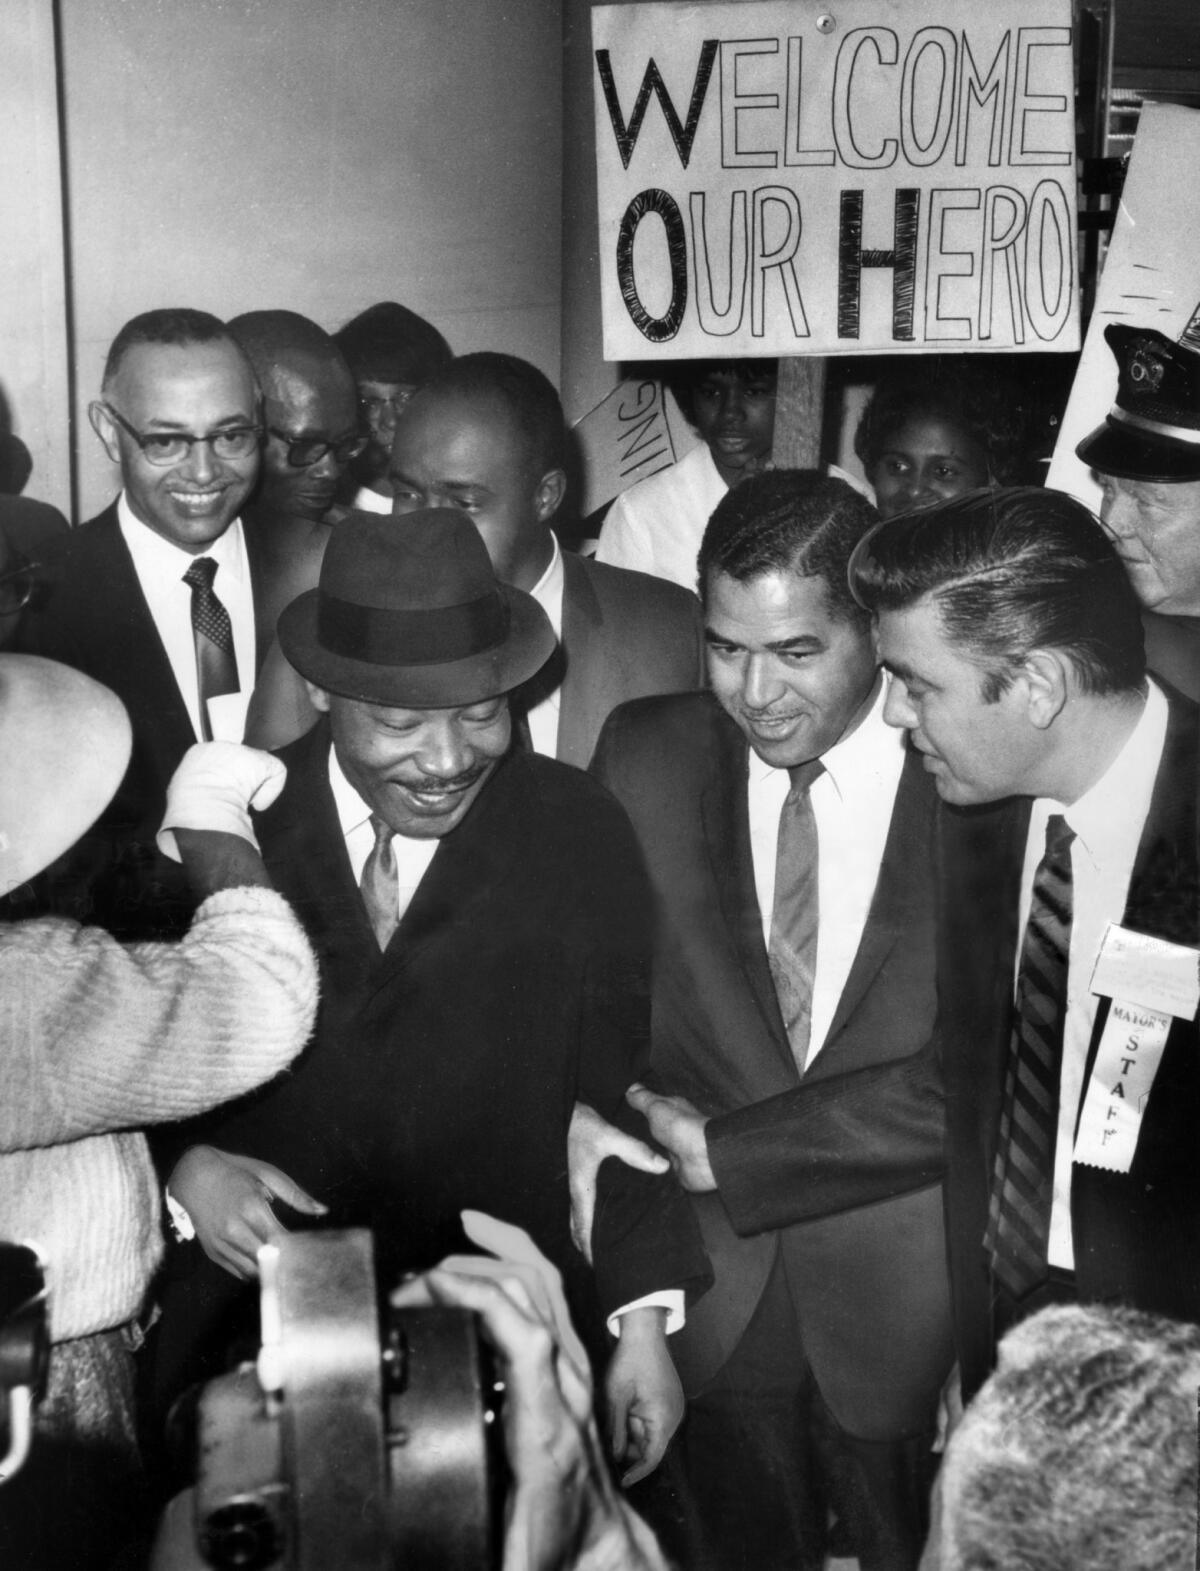 Martin Luther King Jr. was surrounded by heavy security when he arrived in Los Angeles on Feb. 24, 1965, to give a series of speeches pushing for voting rights legislation.